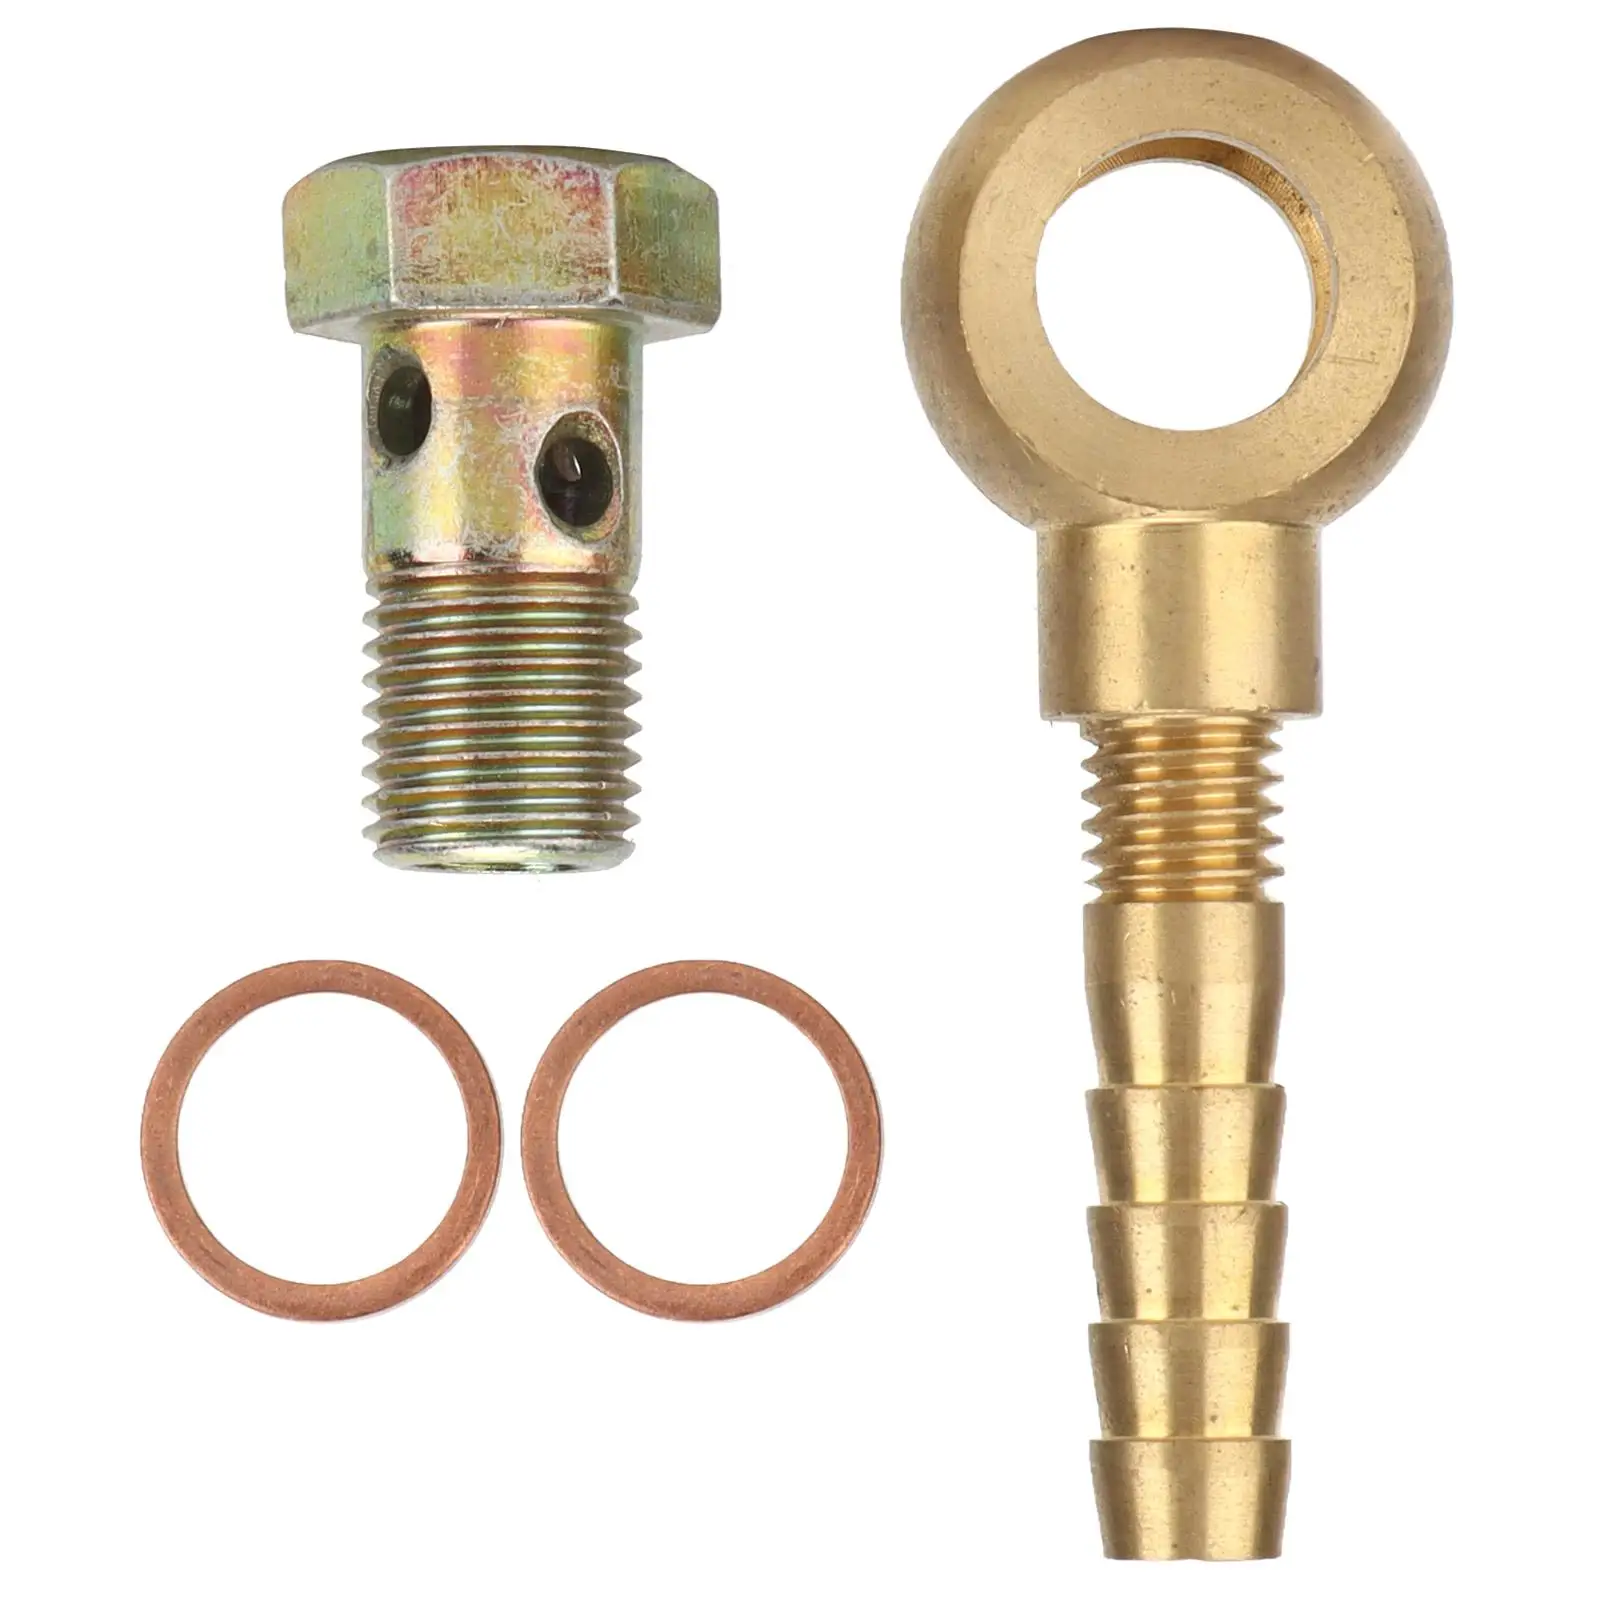 Turbo Banjo Fitting Kit with Hose Barb - Anti-Rust Water Coolant Connection